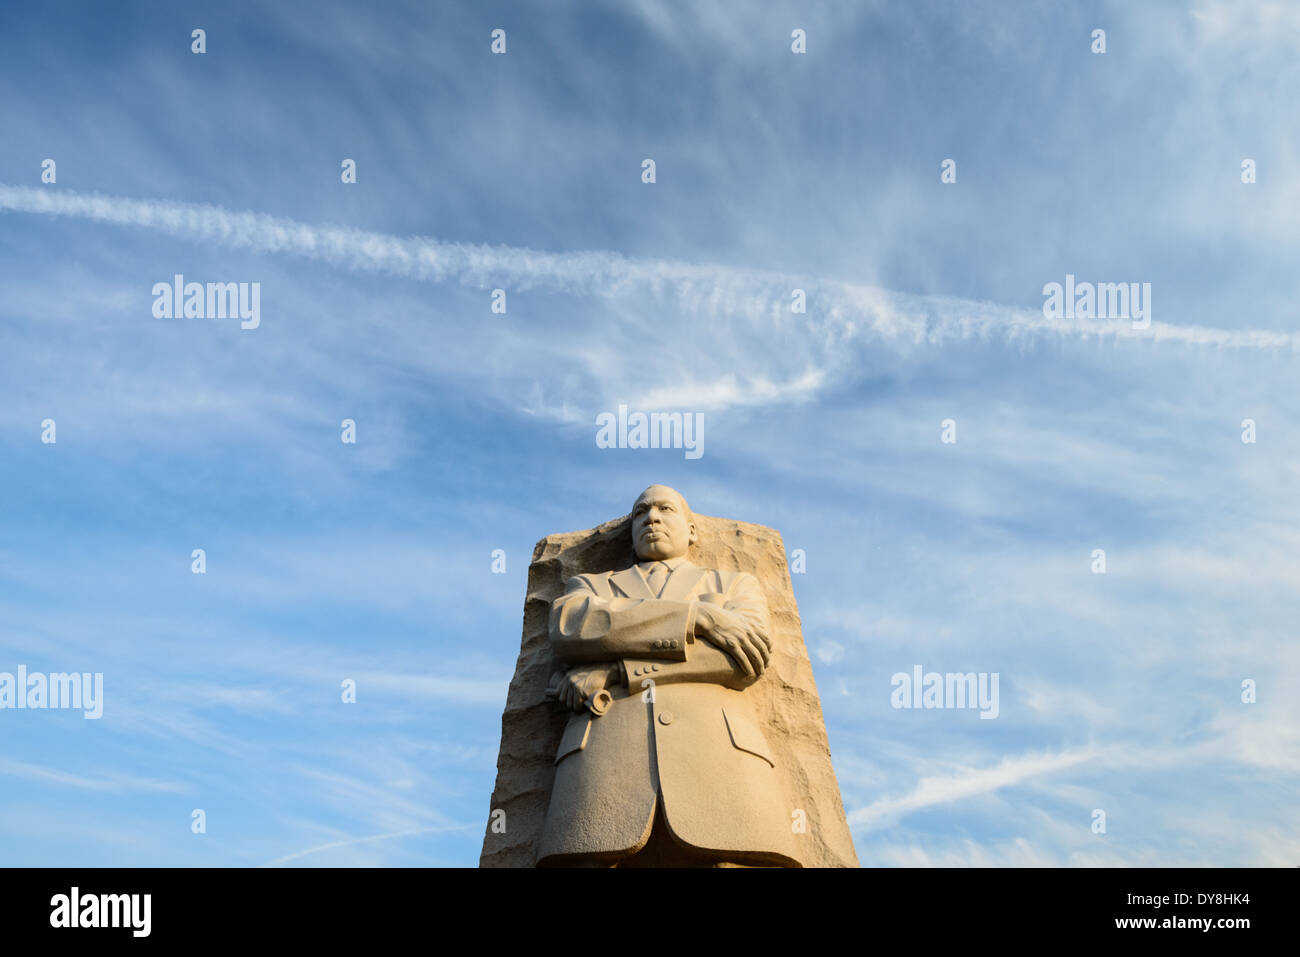 WASHINGTON DC, USA - The main statue of the Martin Luther King Jr Memorial in Washington DC set against a mostly blue sky with high clouds. Stock Photo